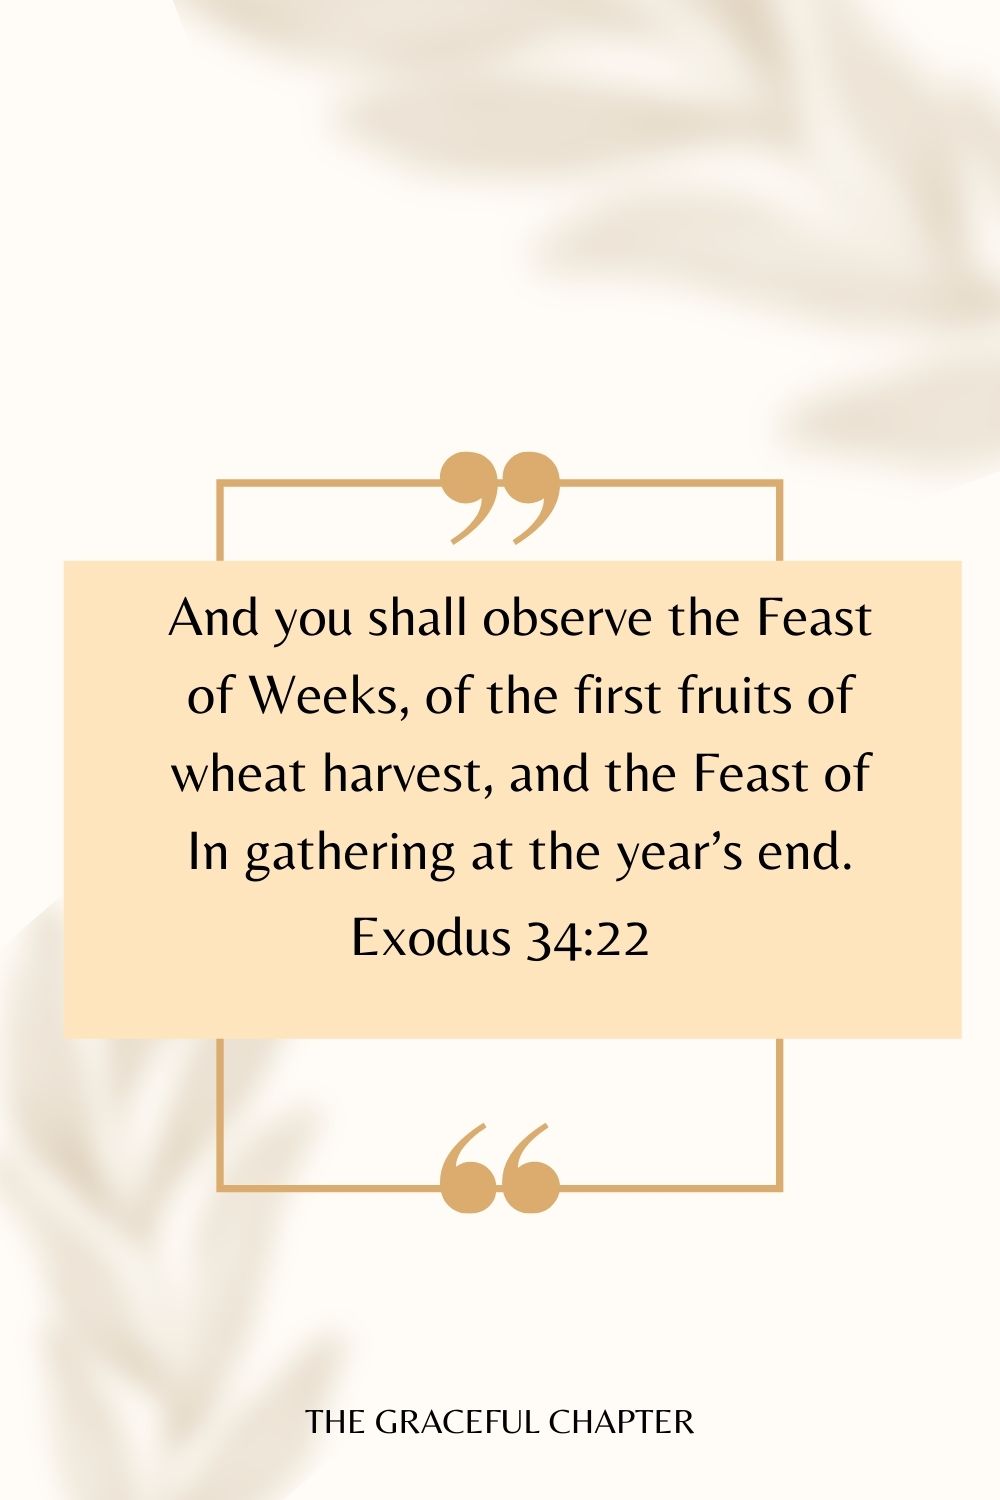 And you shall observe the Feast of Weeks, of the first fruits of wheat harvest, and the Feast of In gathering at the year’s end. Exodus 34:22